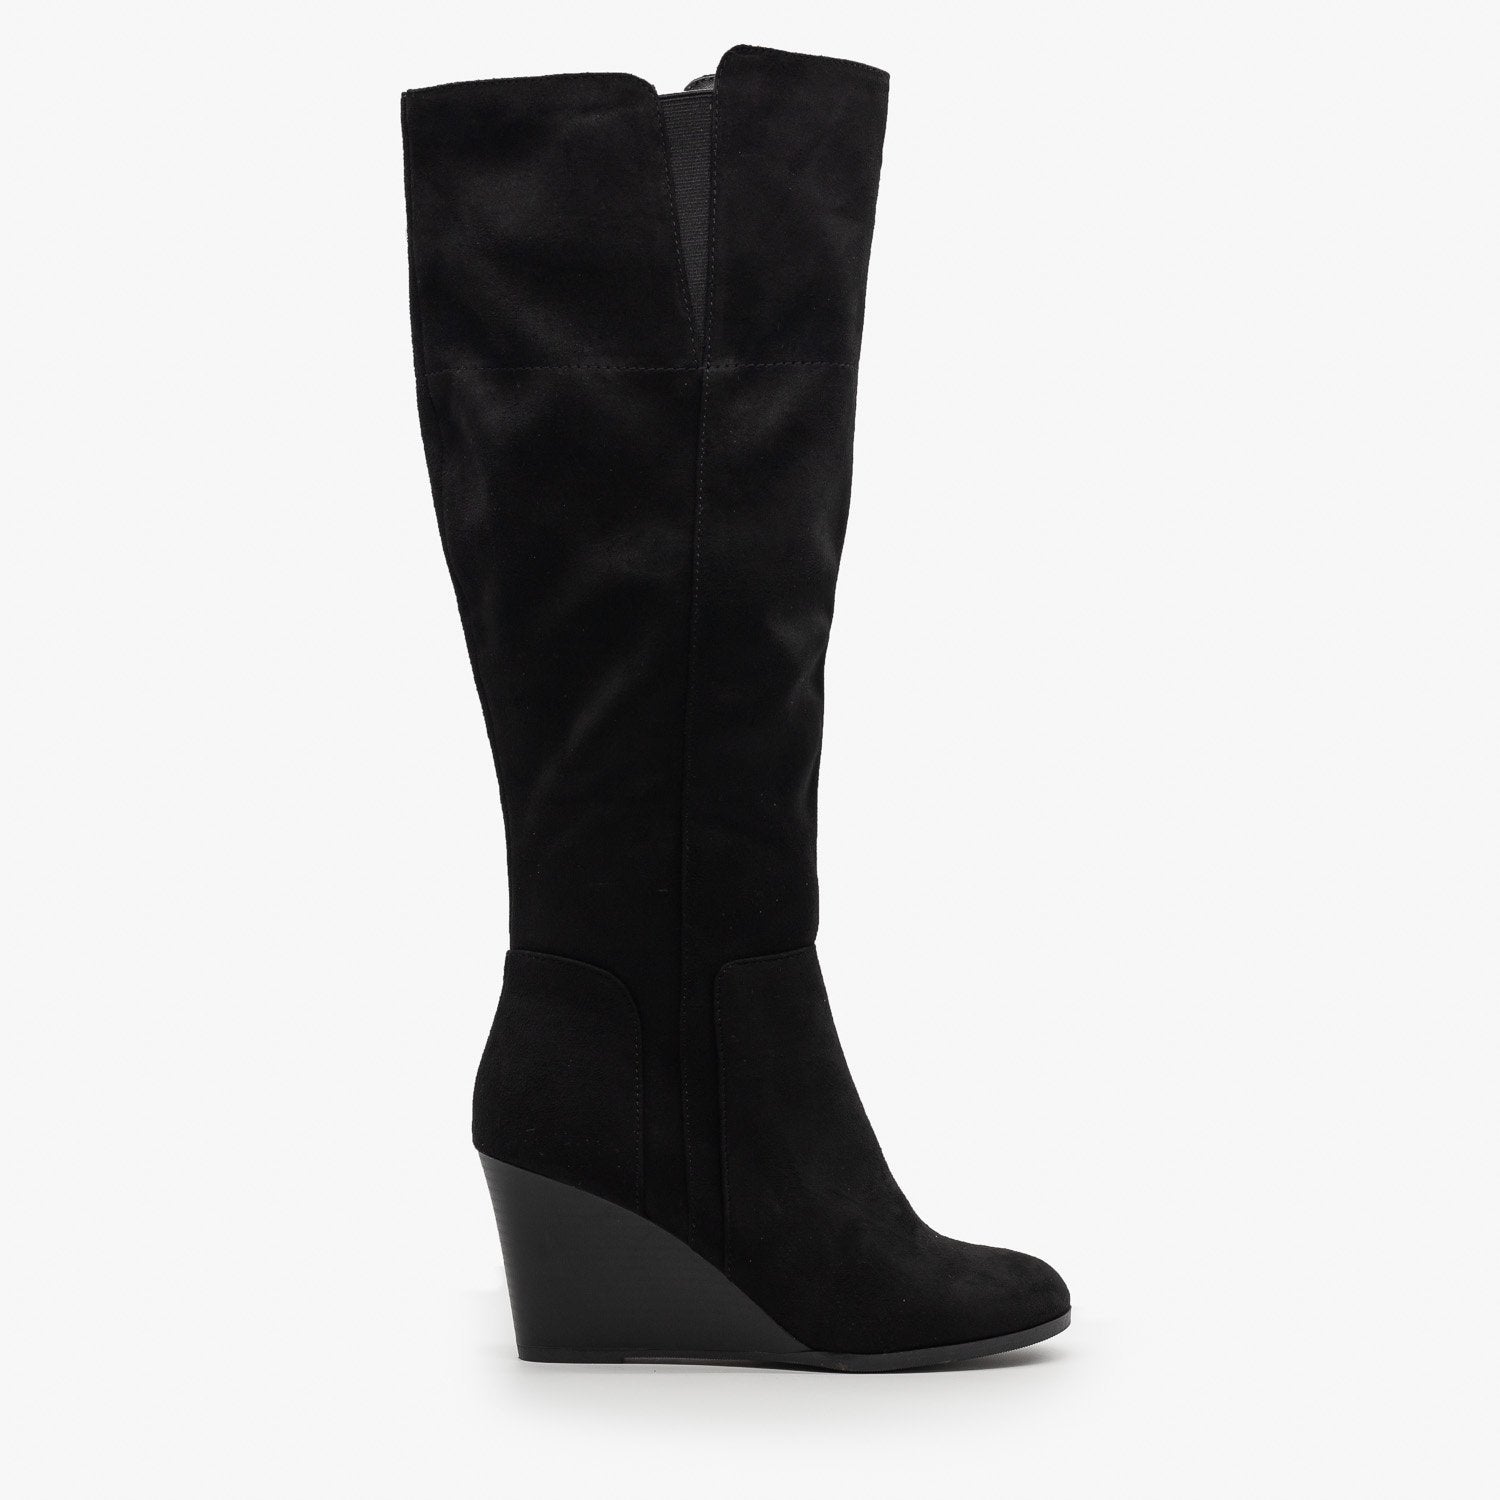 Knee High Boot Wedges - Delicious Shoes 